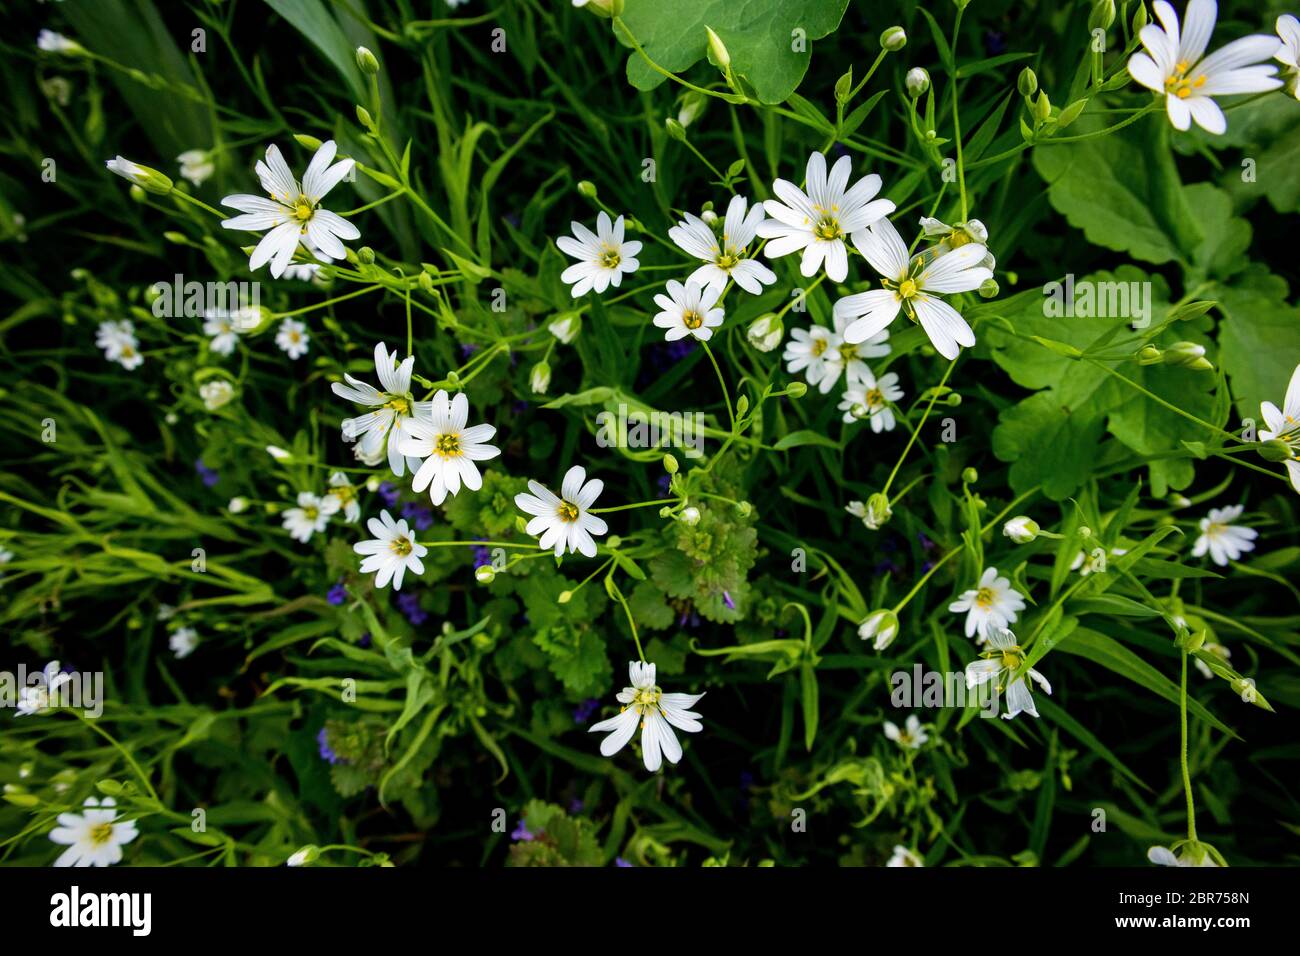 Field of white stellaria media flowers in the forest. Stock Photo